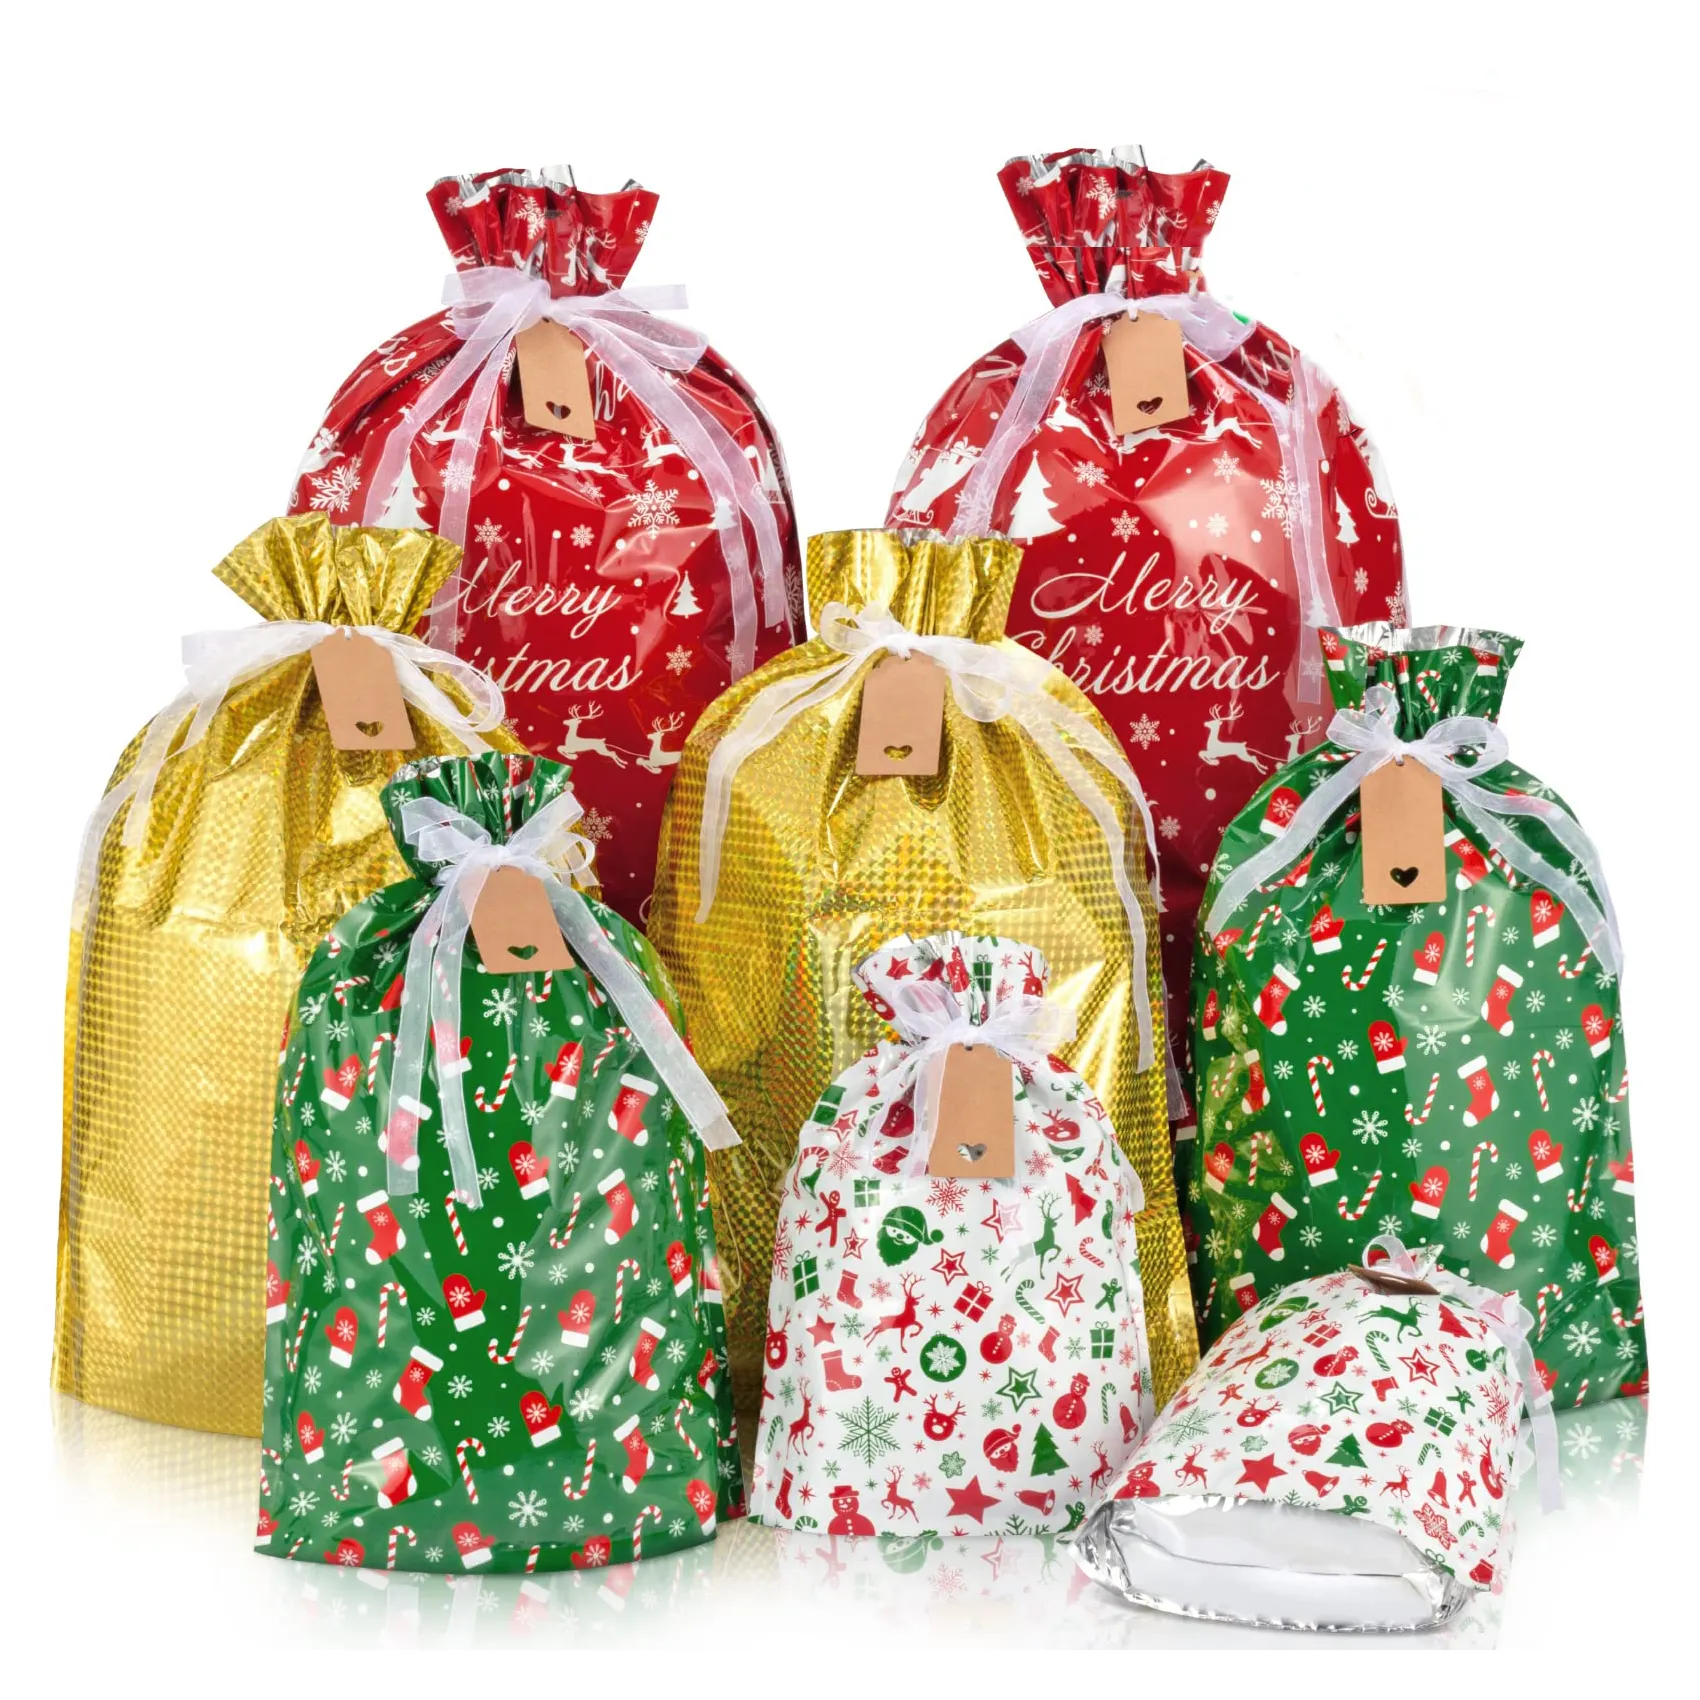 Christmas Decorations Small Medium Large Santa Drawstring Gift Wrapping Bags for Treat, Goodies, Party